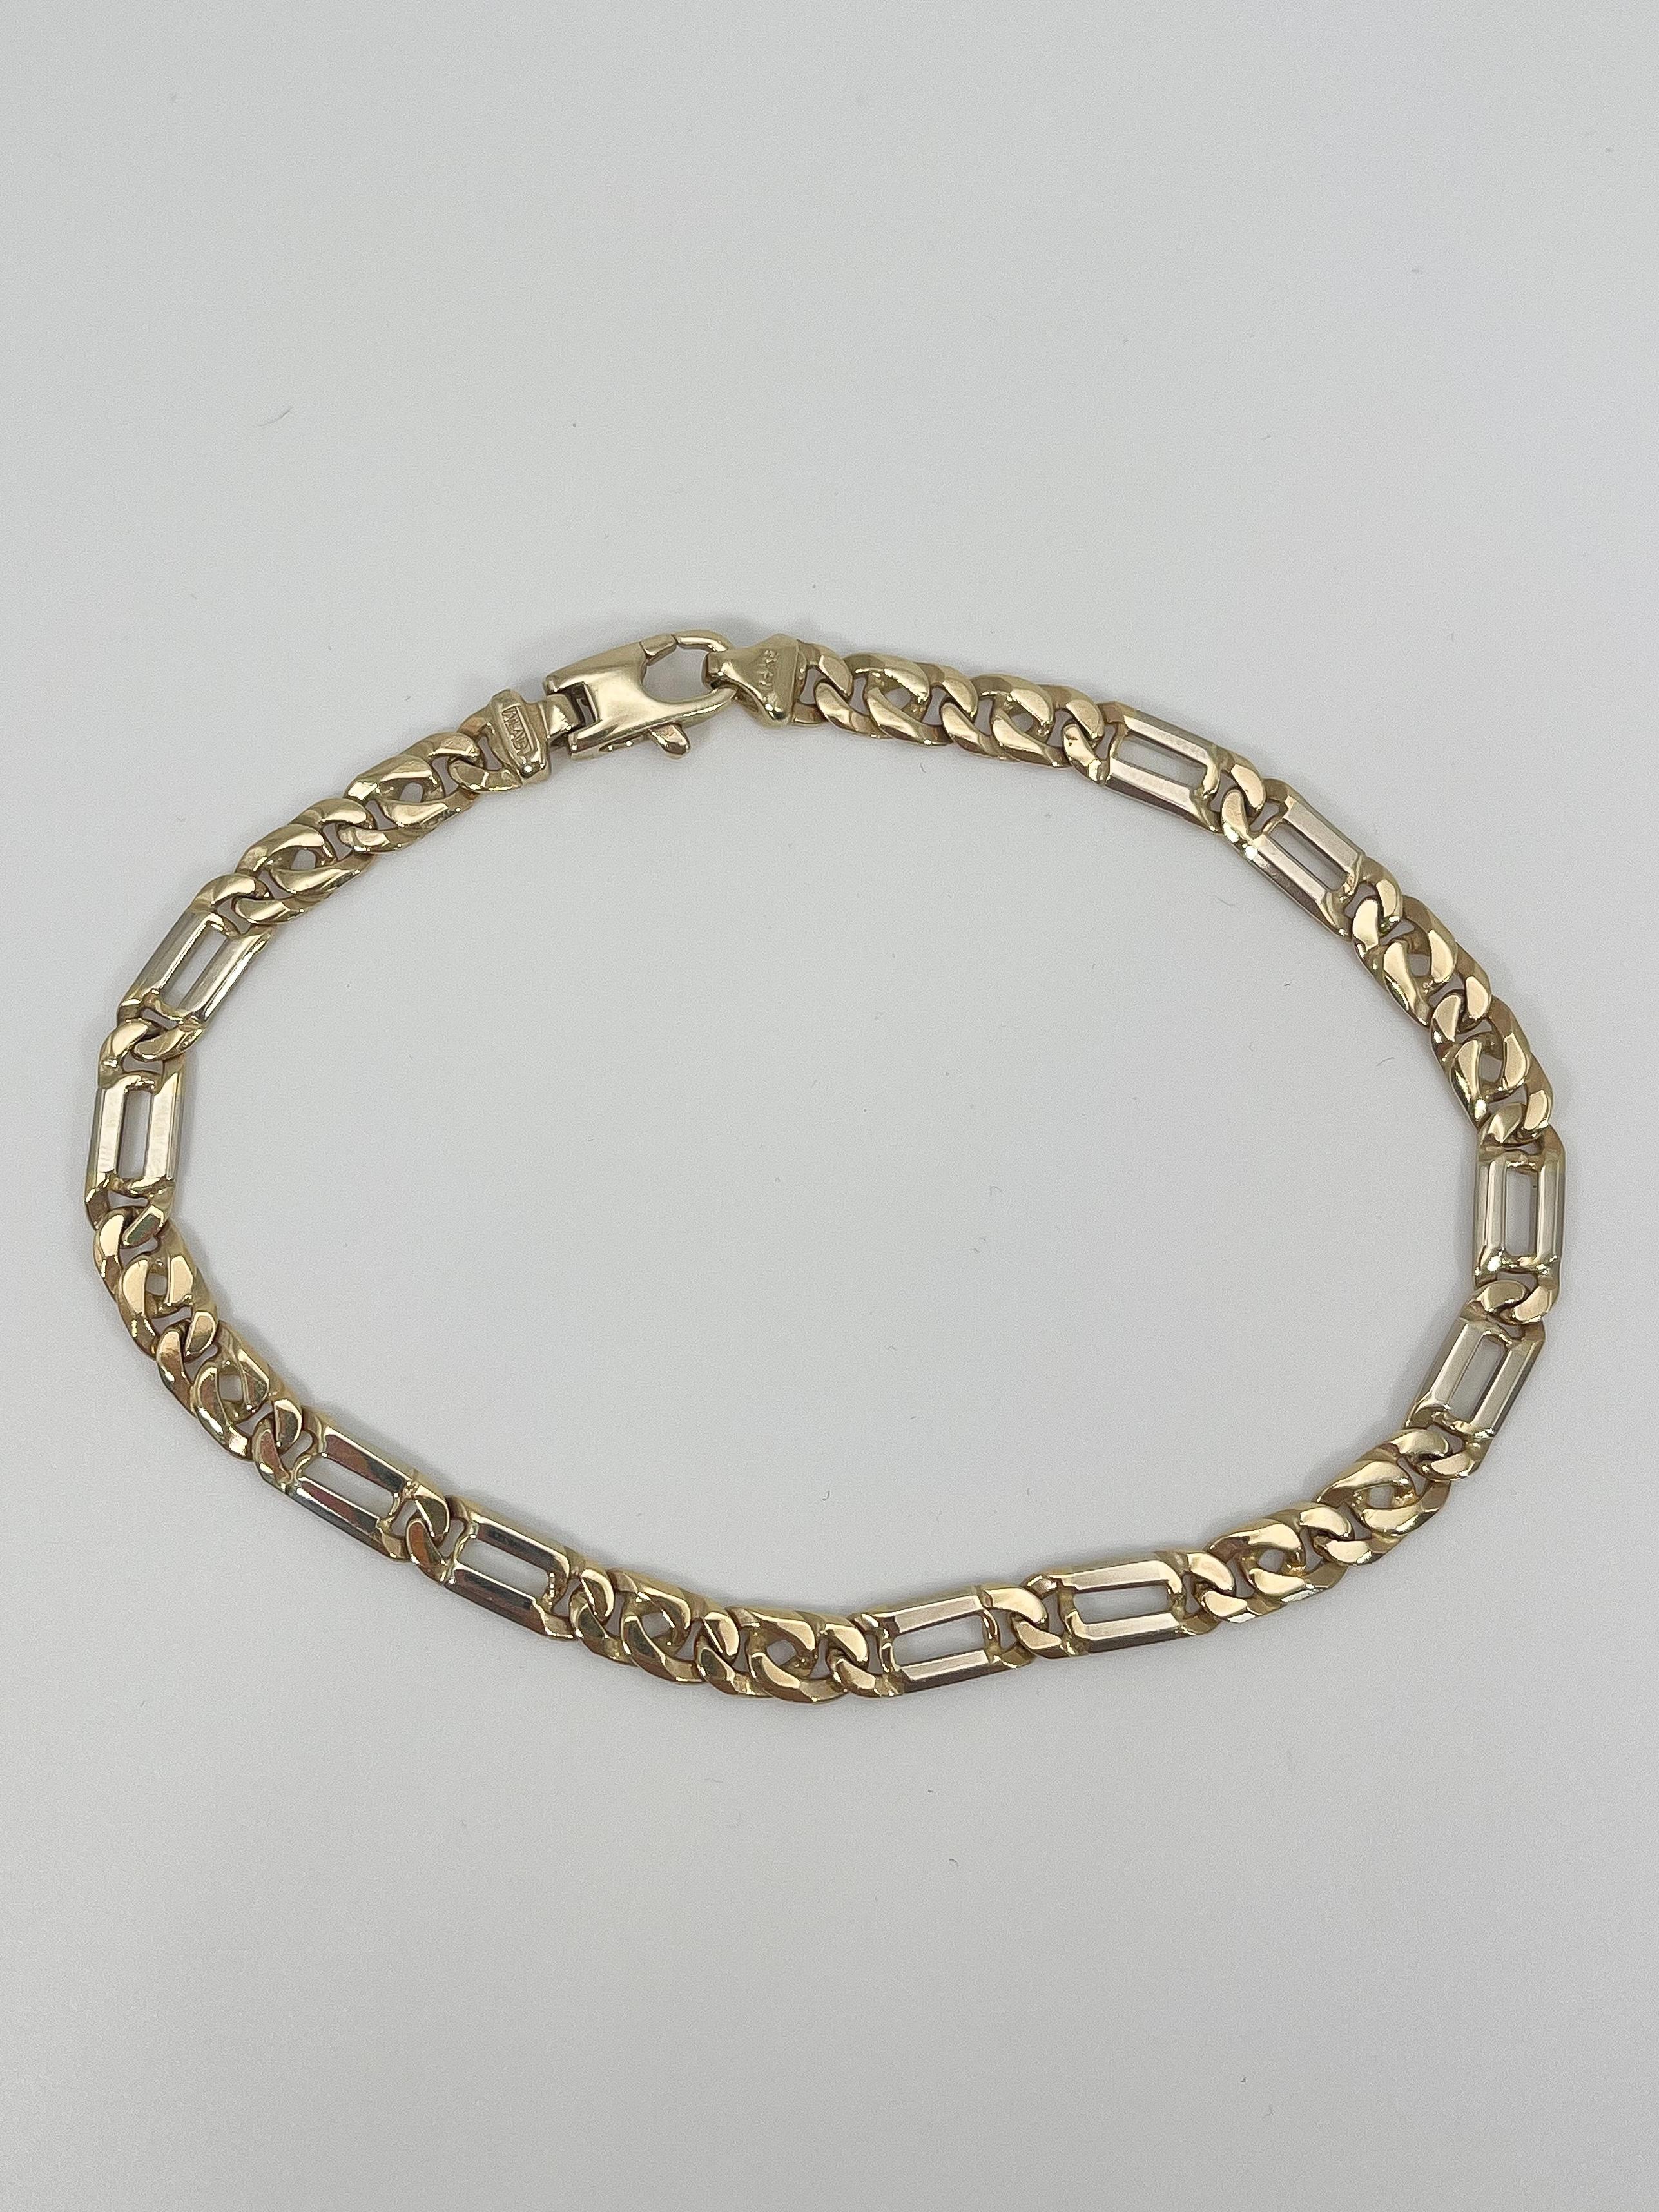 14k yellow gold men's fancy link bracelet. The length of this bracelet is 8 1/2 inches, the width is 4.9 mm, has a lobster clasp to open and close, and it has a total weight of 12.5 grams.